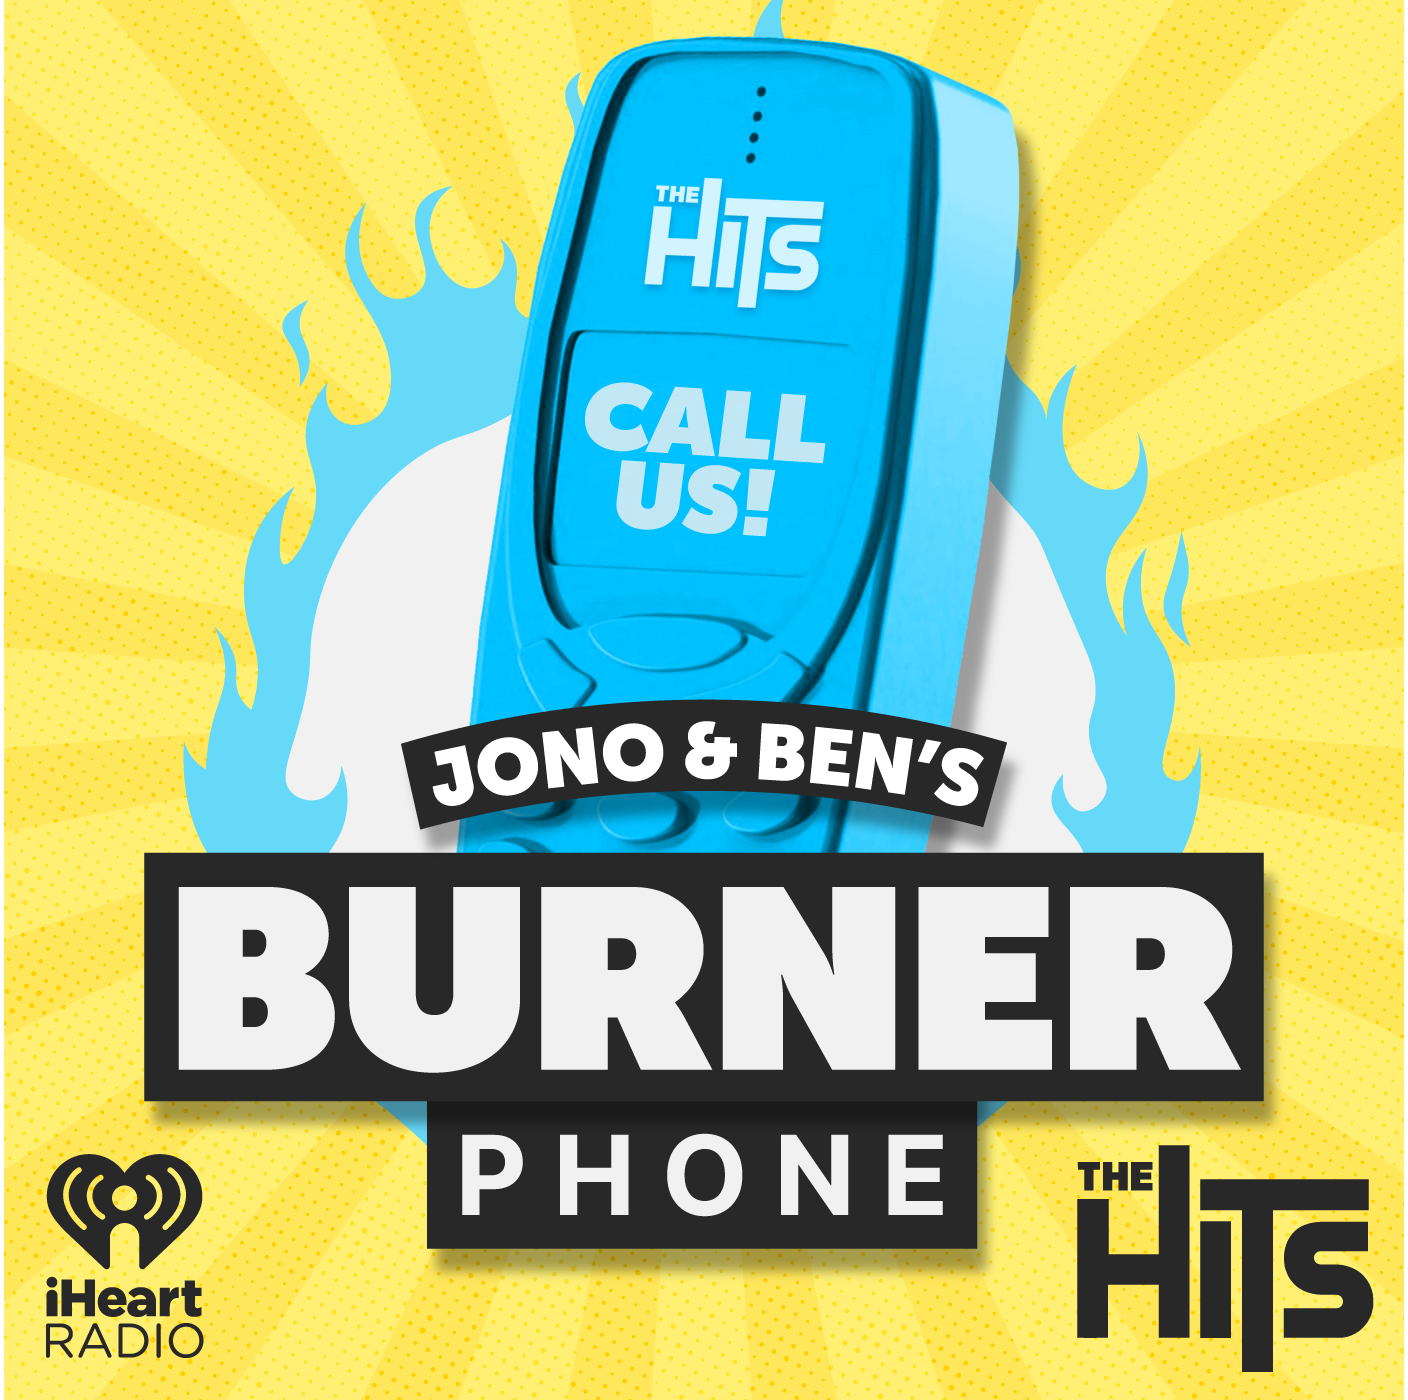 The Burner Phone 33: THE LAST EVER EPISODE..